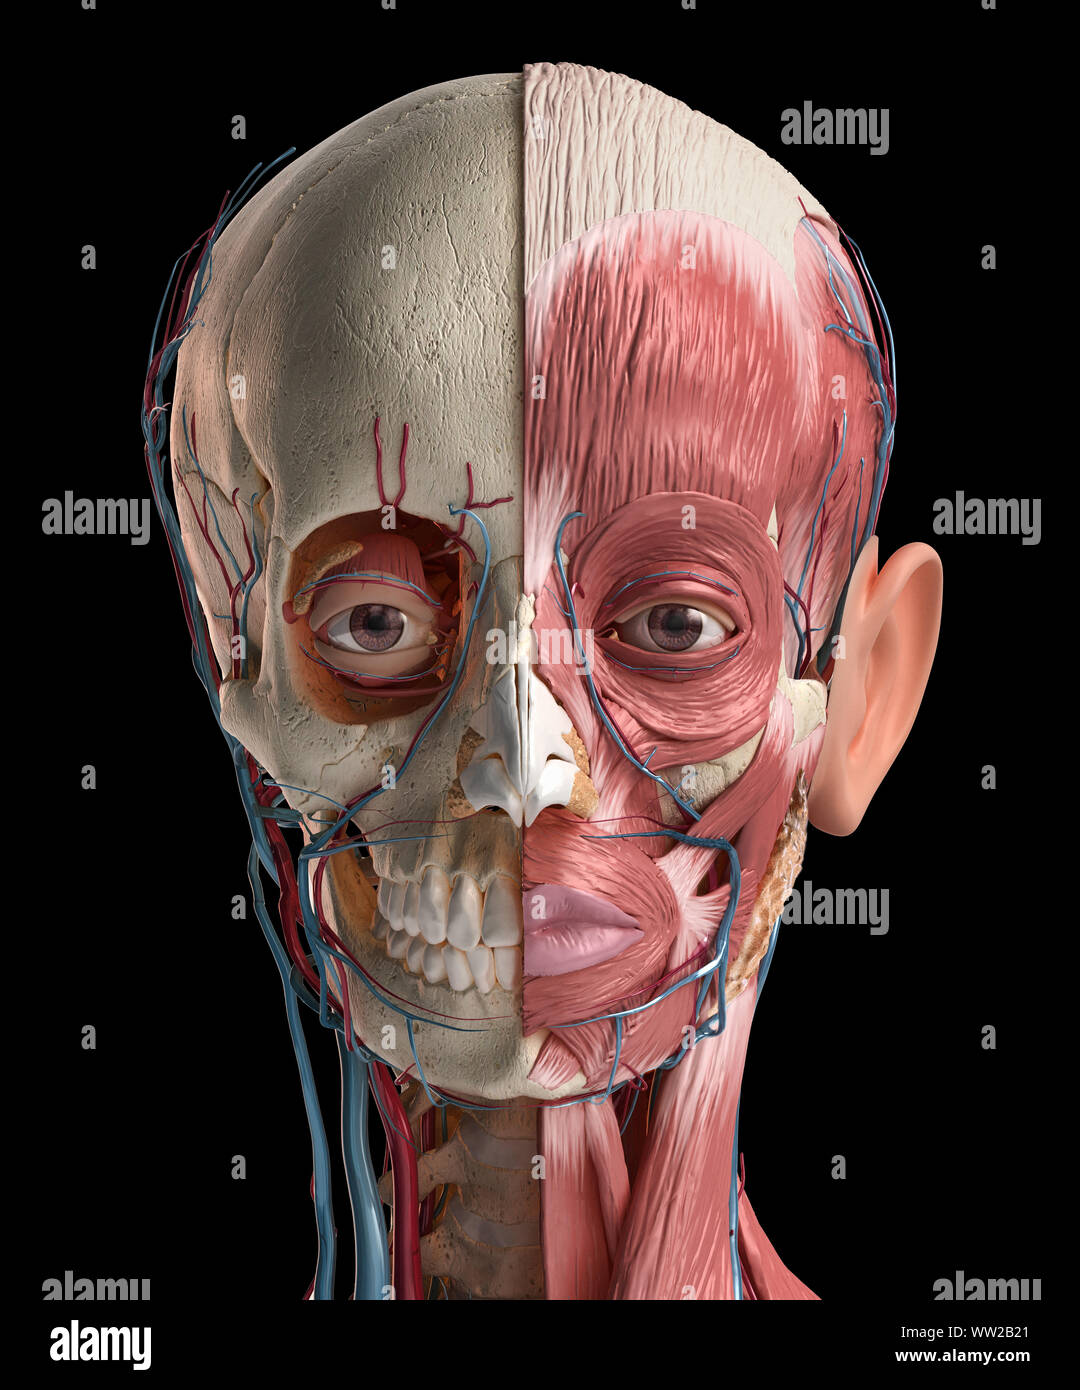 Man Face On Black Background Images Stock Photos Vectors Shutterstock